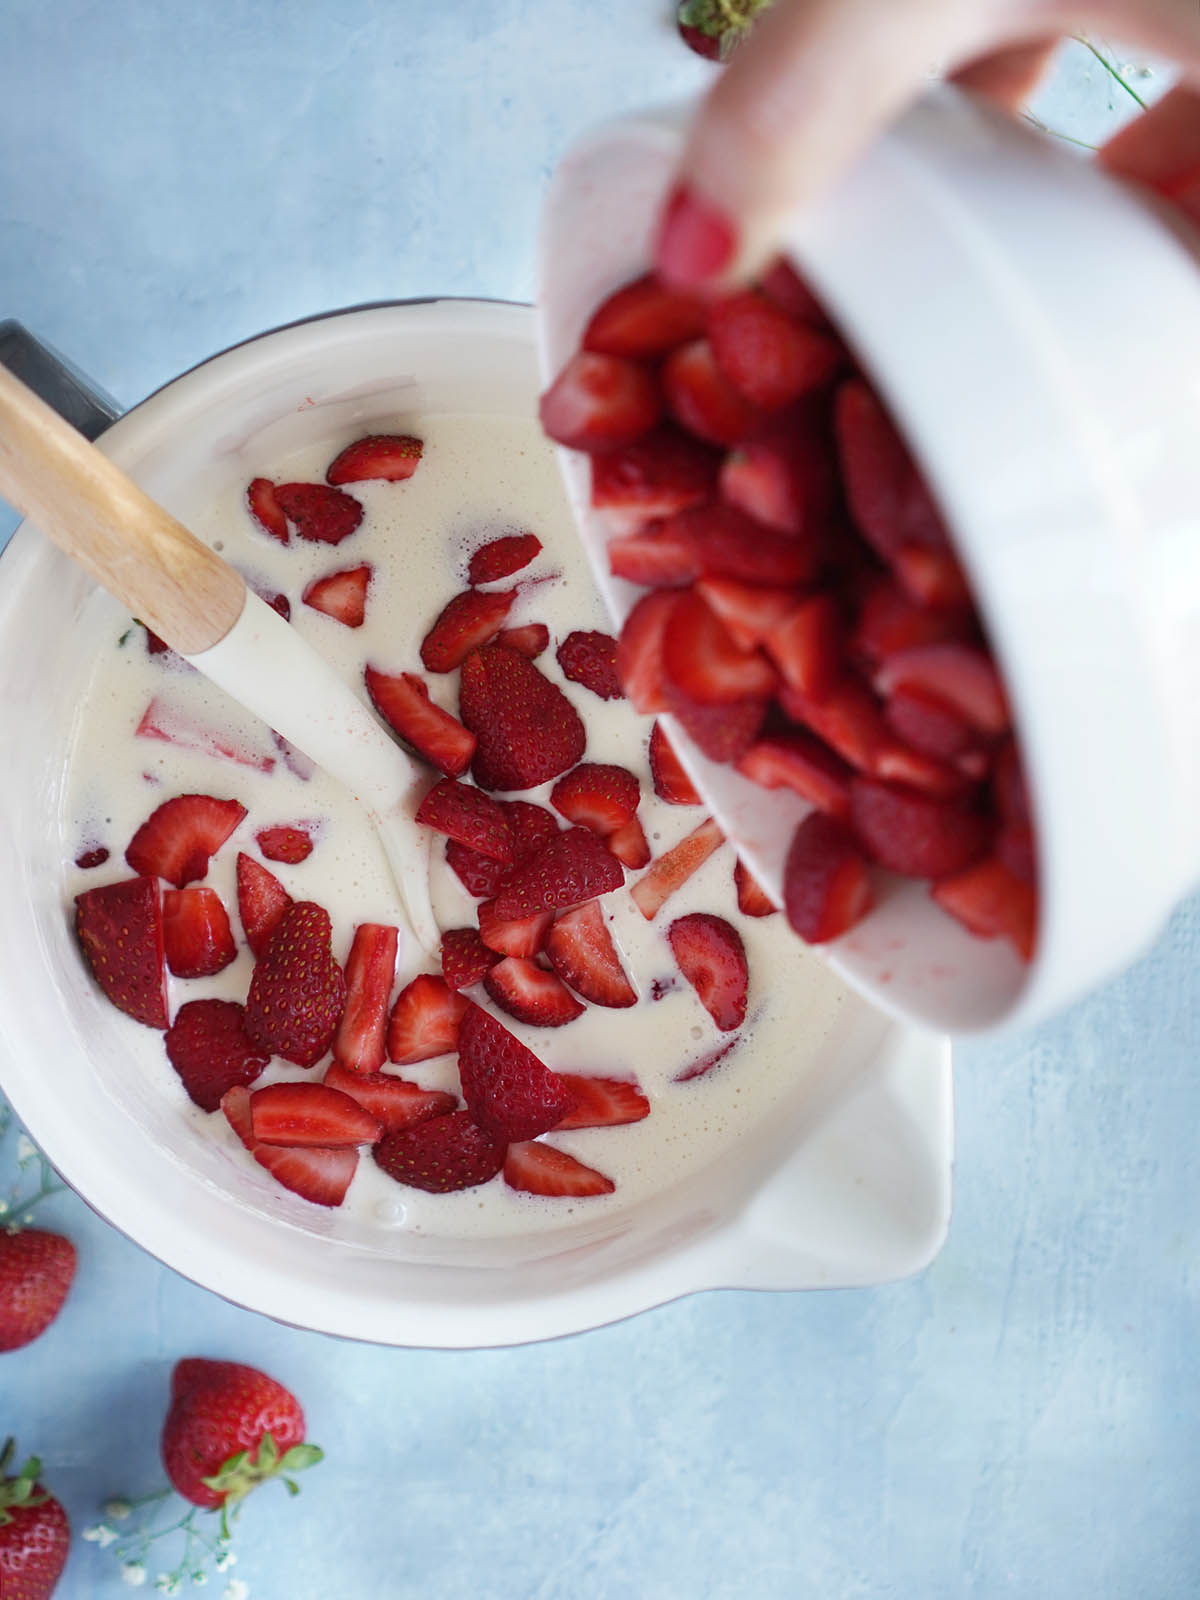 Pouring sliced strawberries from a bowl into a large bowl with the cream.